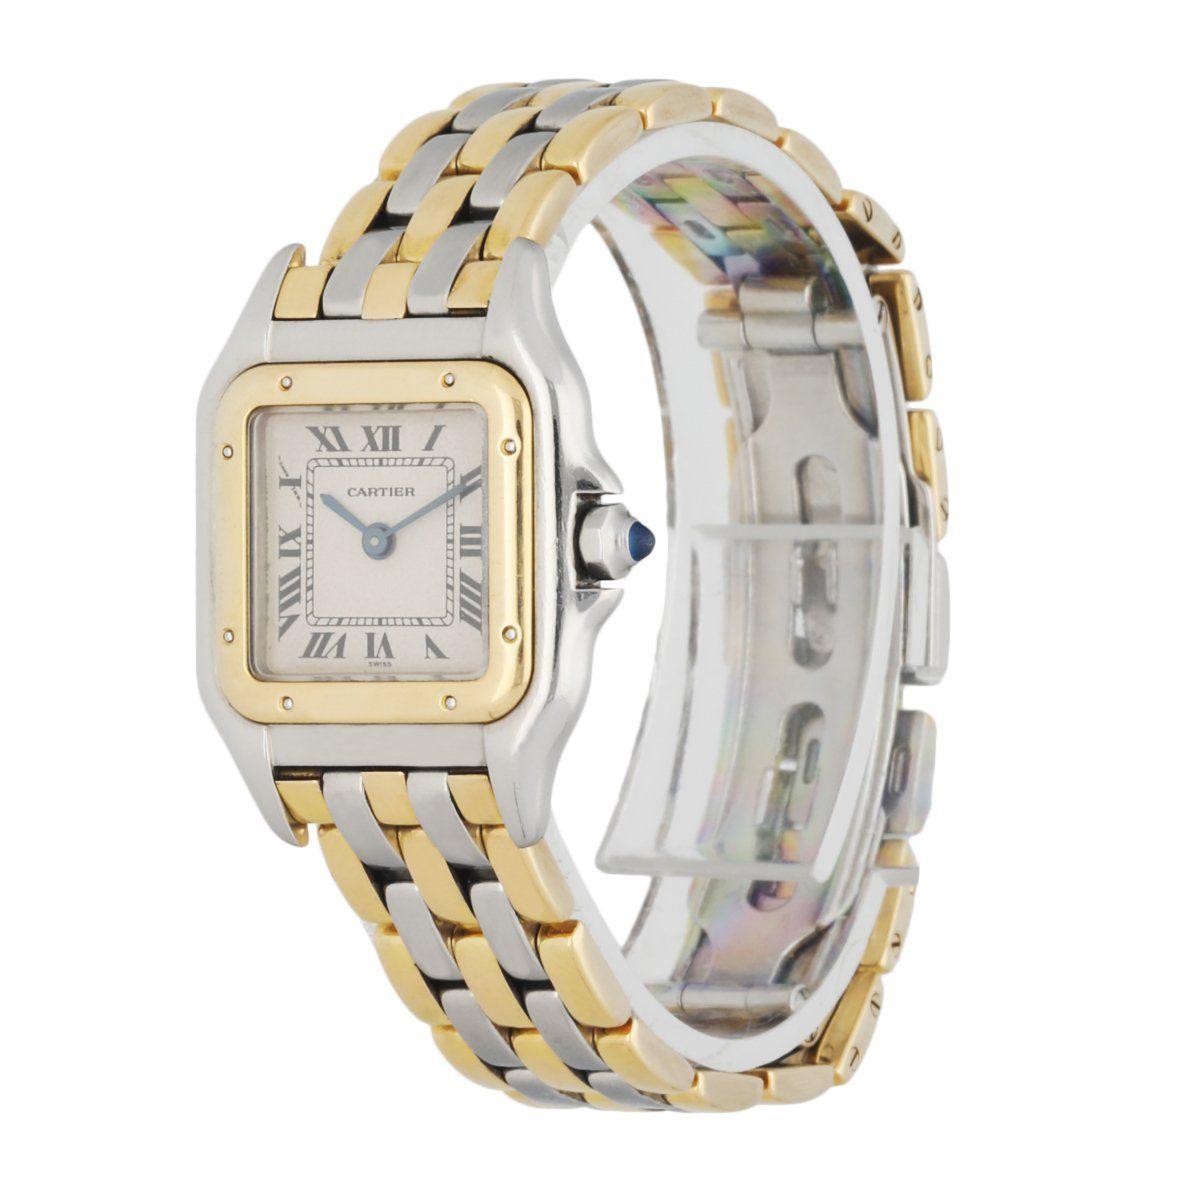 Cartier Panthere 112000R Ladies Watch. 23mm Stainless Steel case. 18K Yellow GoldÂ fixt bezel.Â Off-White dial with Blue steel hands and black Roman numeral hour markers. Minute markers on the inner dial. Two-Tone Stainless Steel & 18K yellow gold